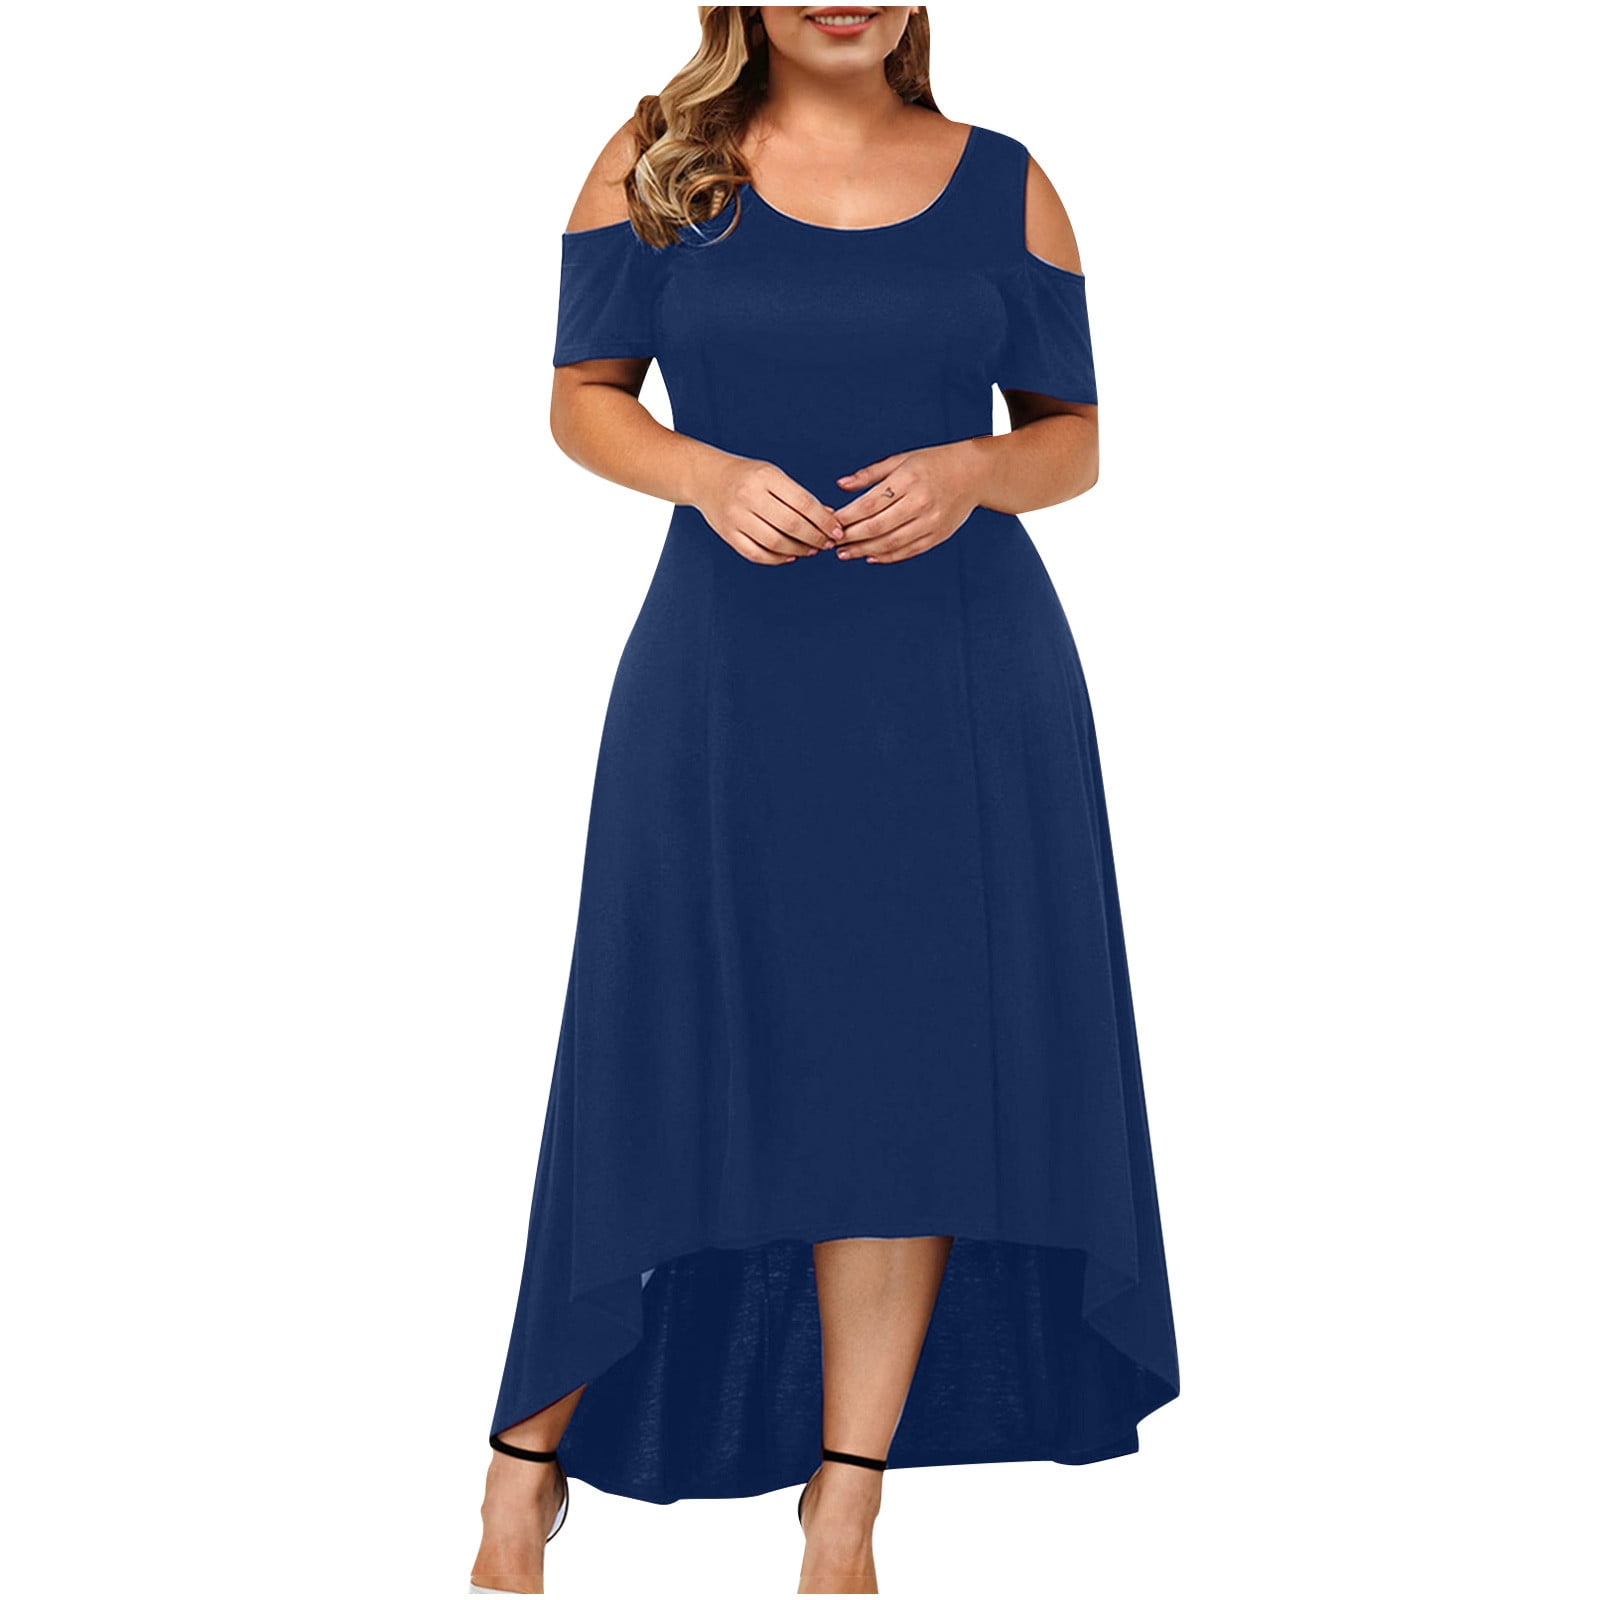 SOOMLON Elegant Plus Size Prom Dresses for Women Off Shoulder Evening  Formal Party Gowns Girls Dresses Plus Size Sexy Strapless Lace Short Sleeve